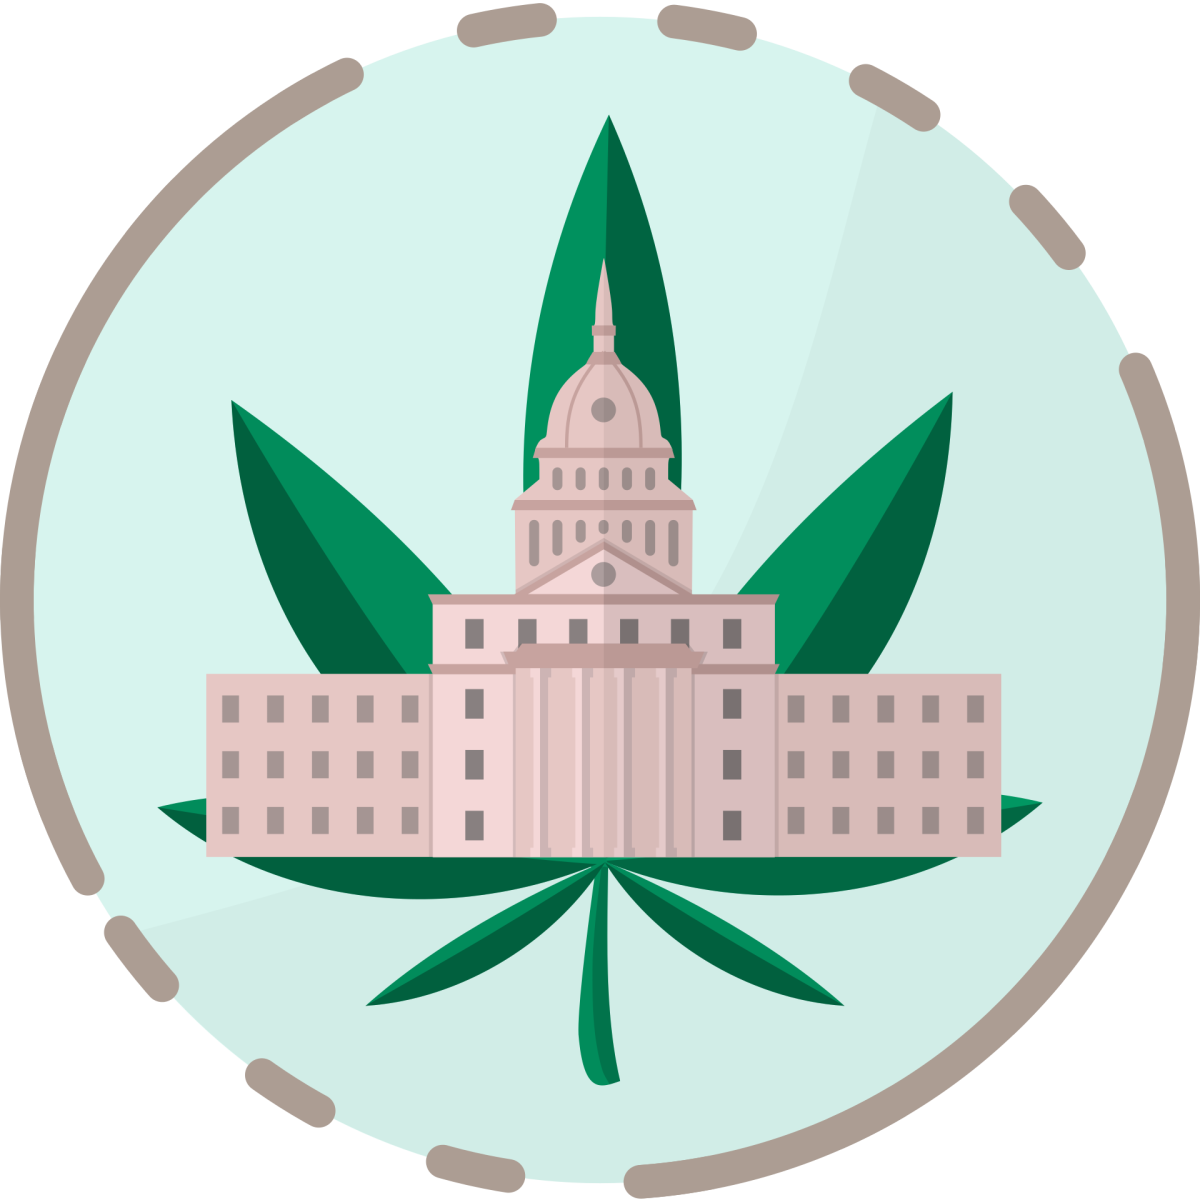 Around 70 bills for marijuana reform have been introduced to the Texas house in the last four months.